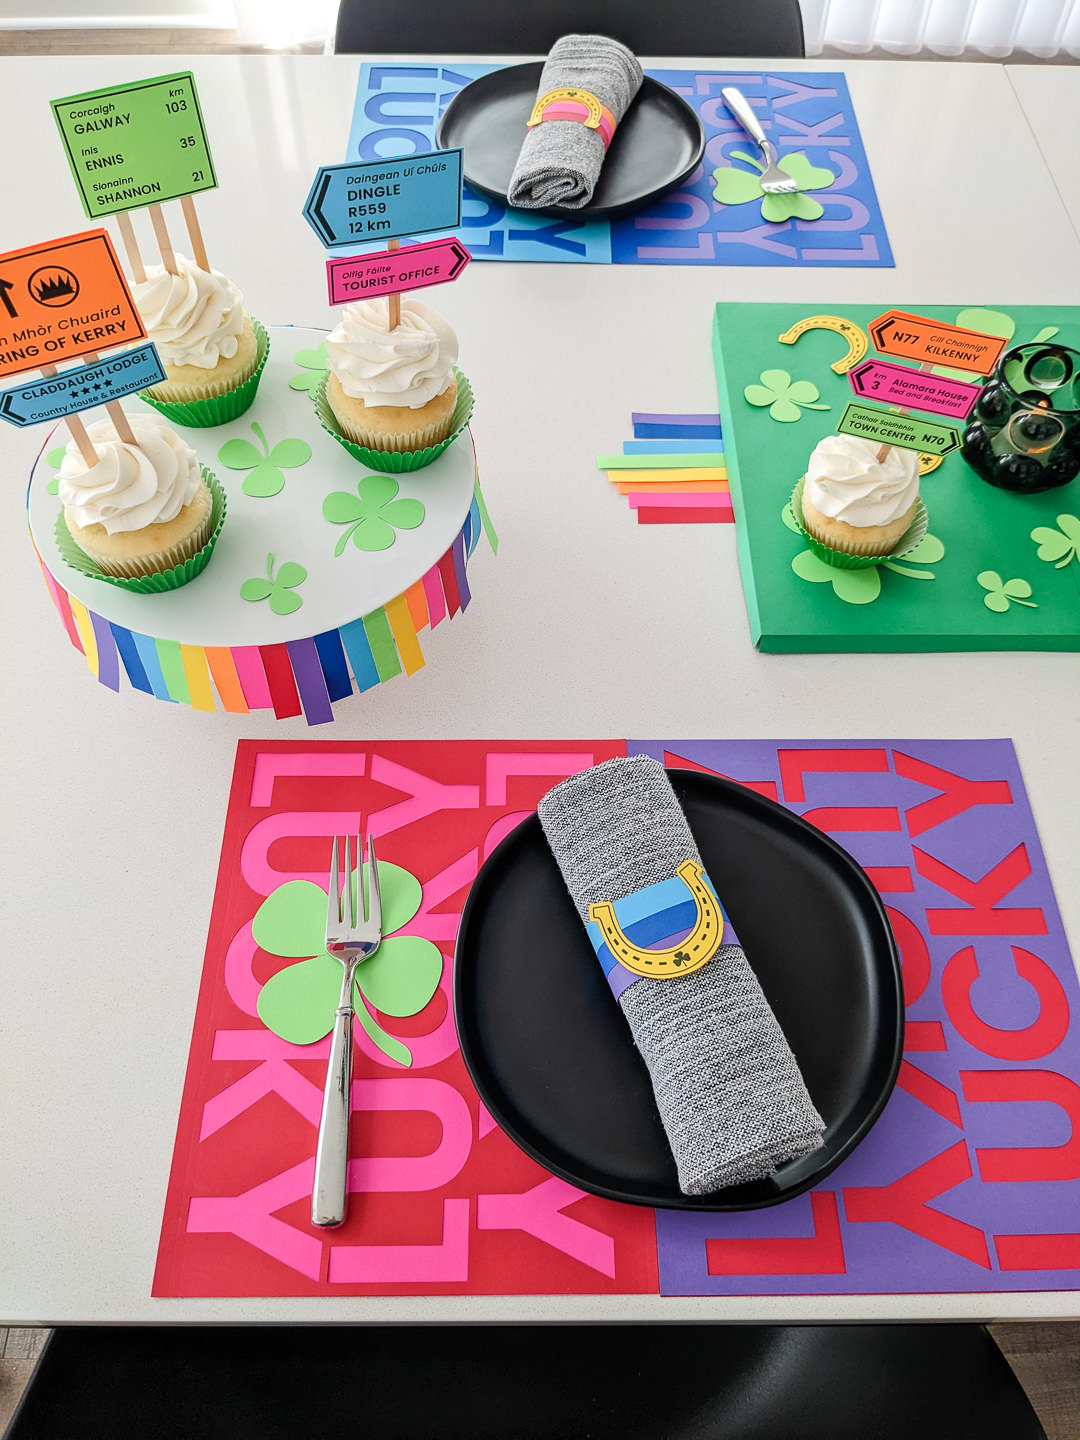 DIY St. Patrick's Day table decor: Rainbow and horseshoe paper napkin rings, lucky rainbow placemats, and Irish road signs cupcake toppers